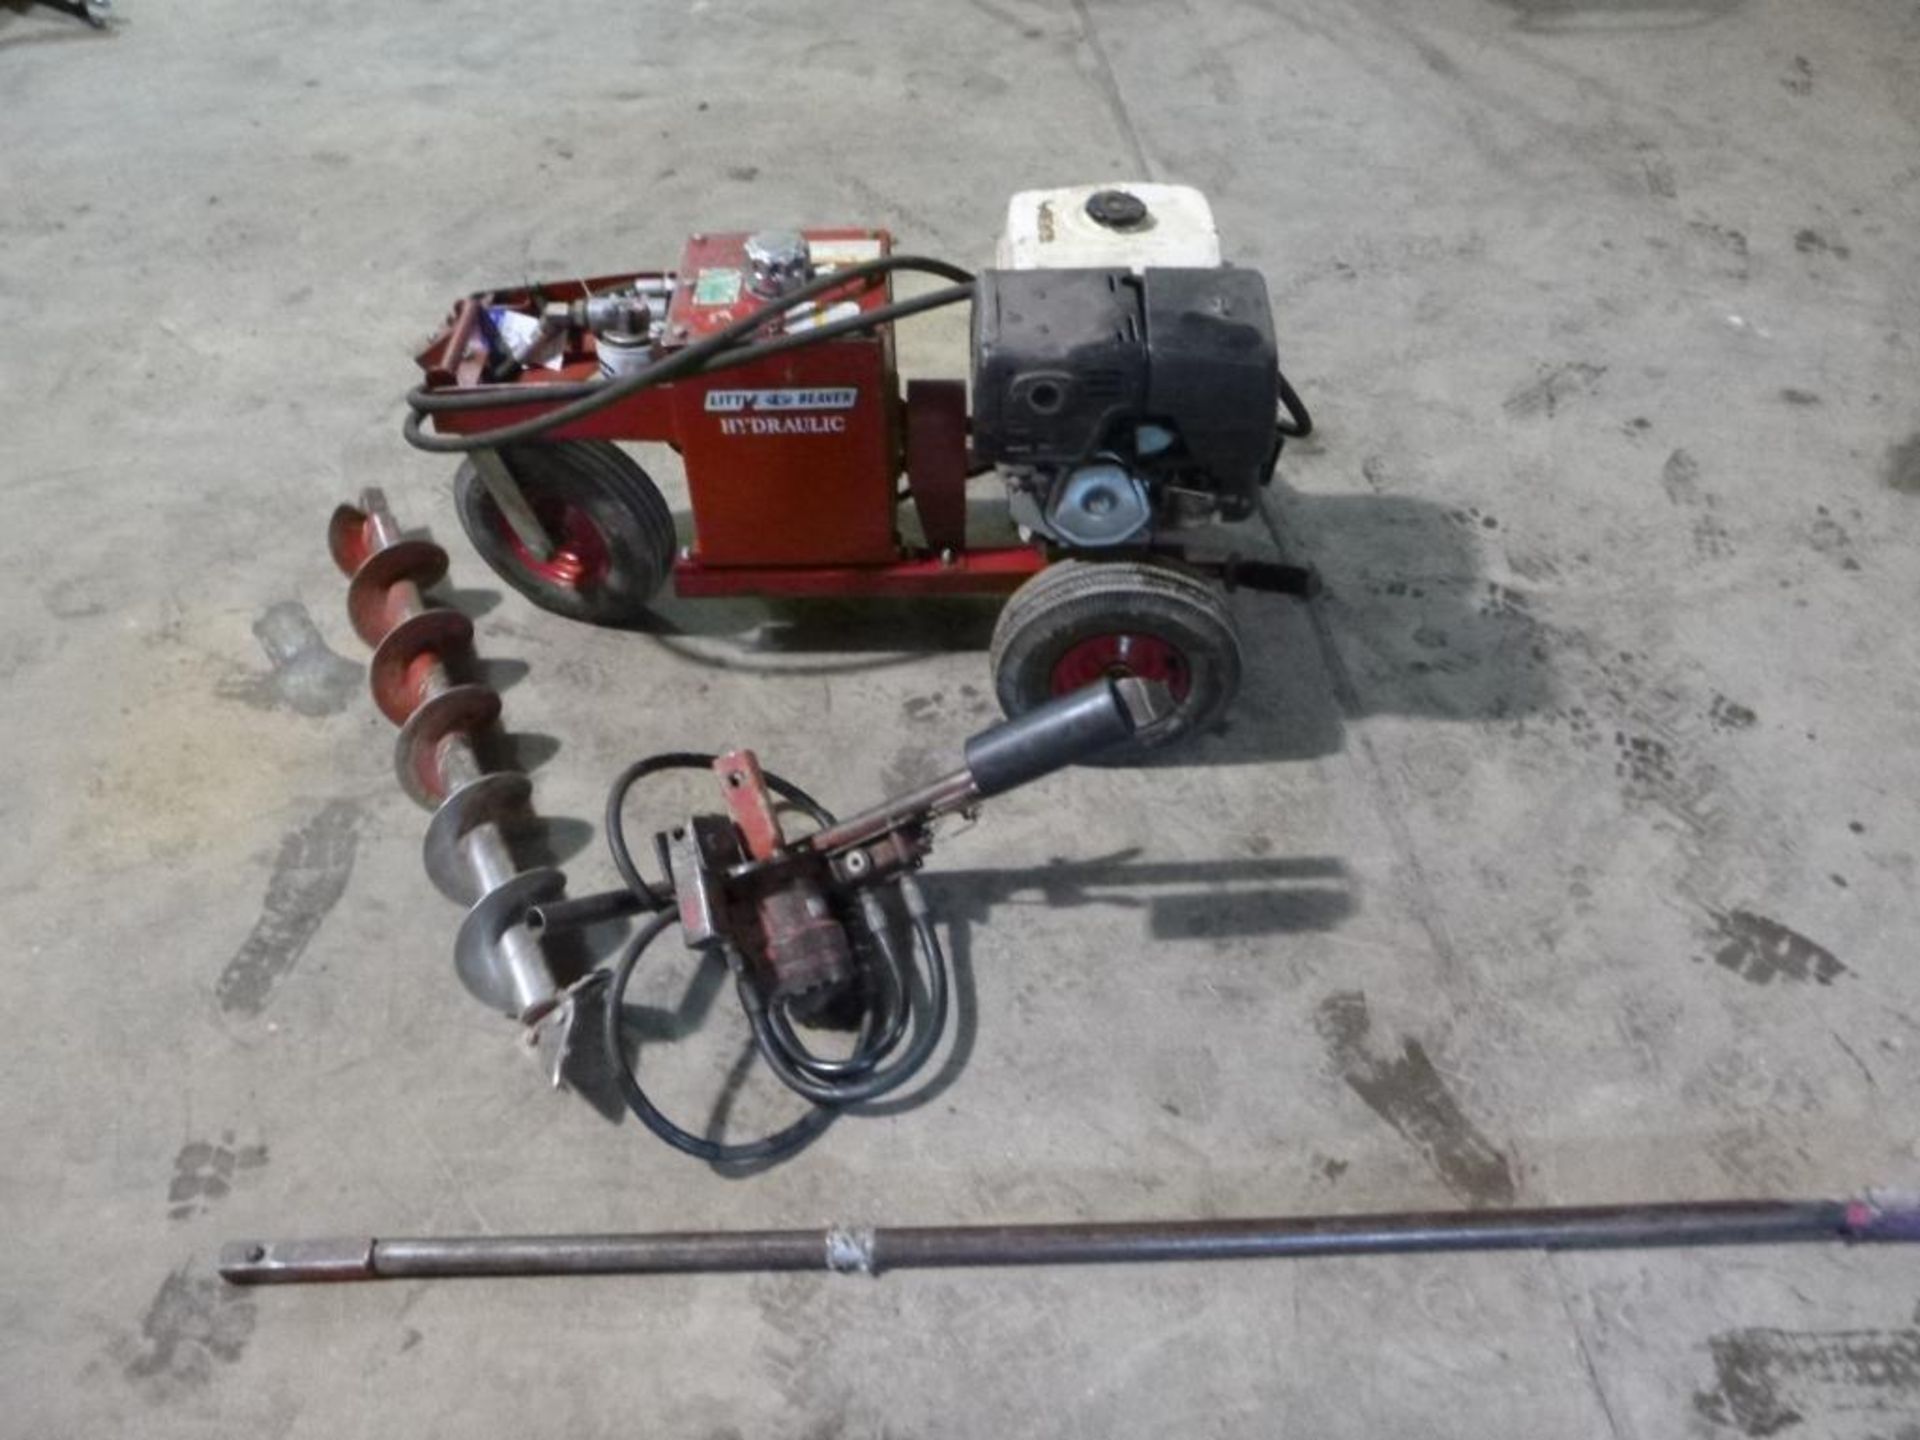 LOT: Little Beaver H4813 Hydraulic 1 Man Auger, Snap-On 8 in. x 42 in. Auger